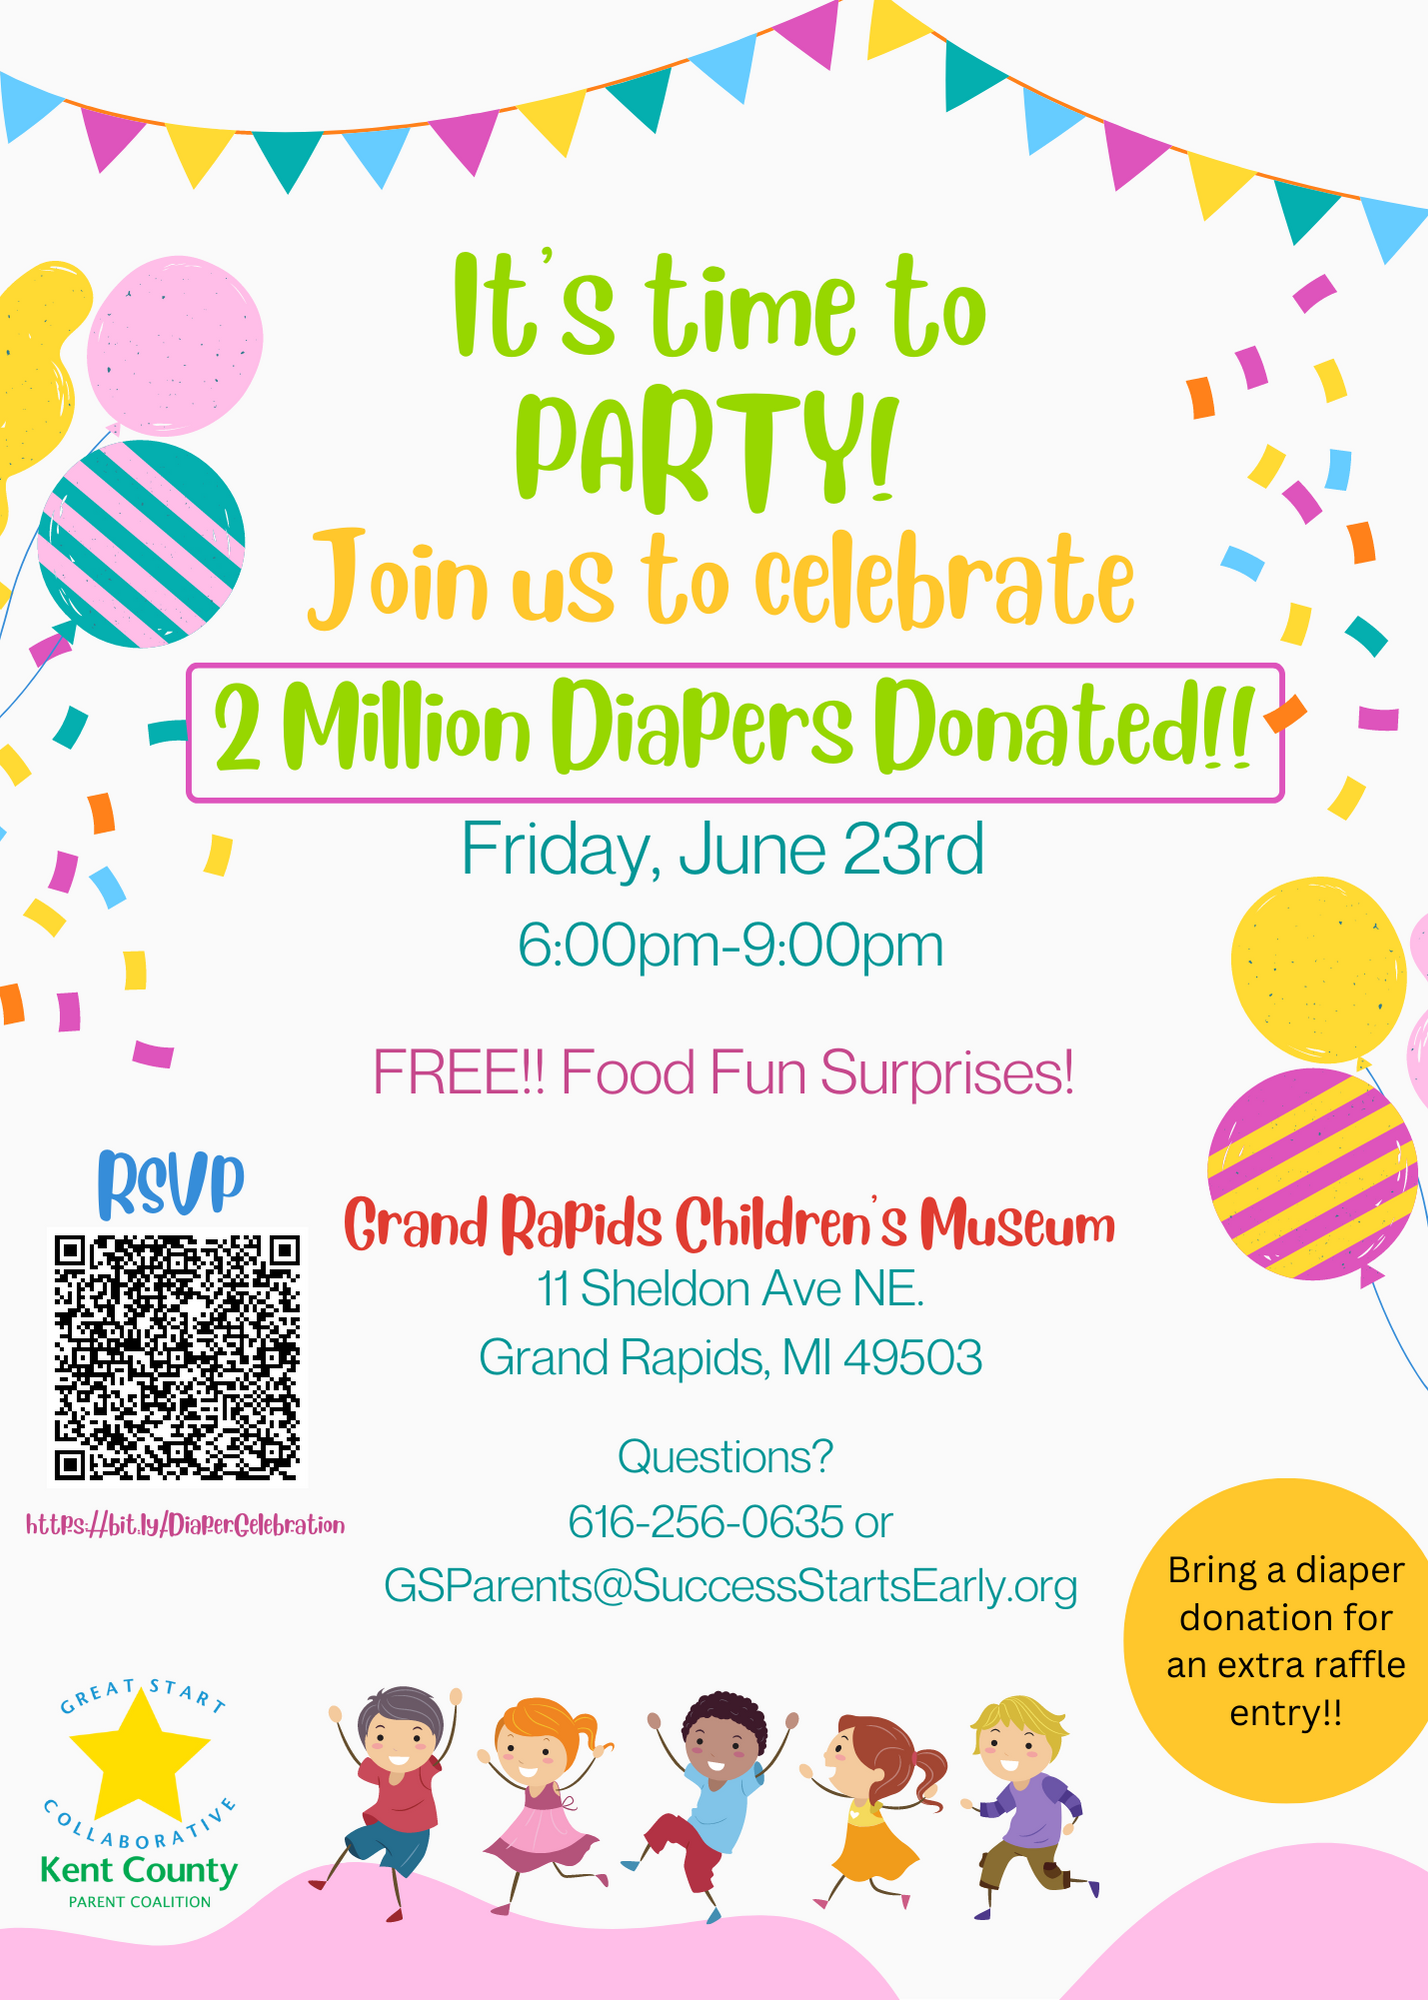 2 Million Diapers Donated! Celebrate With Us!